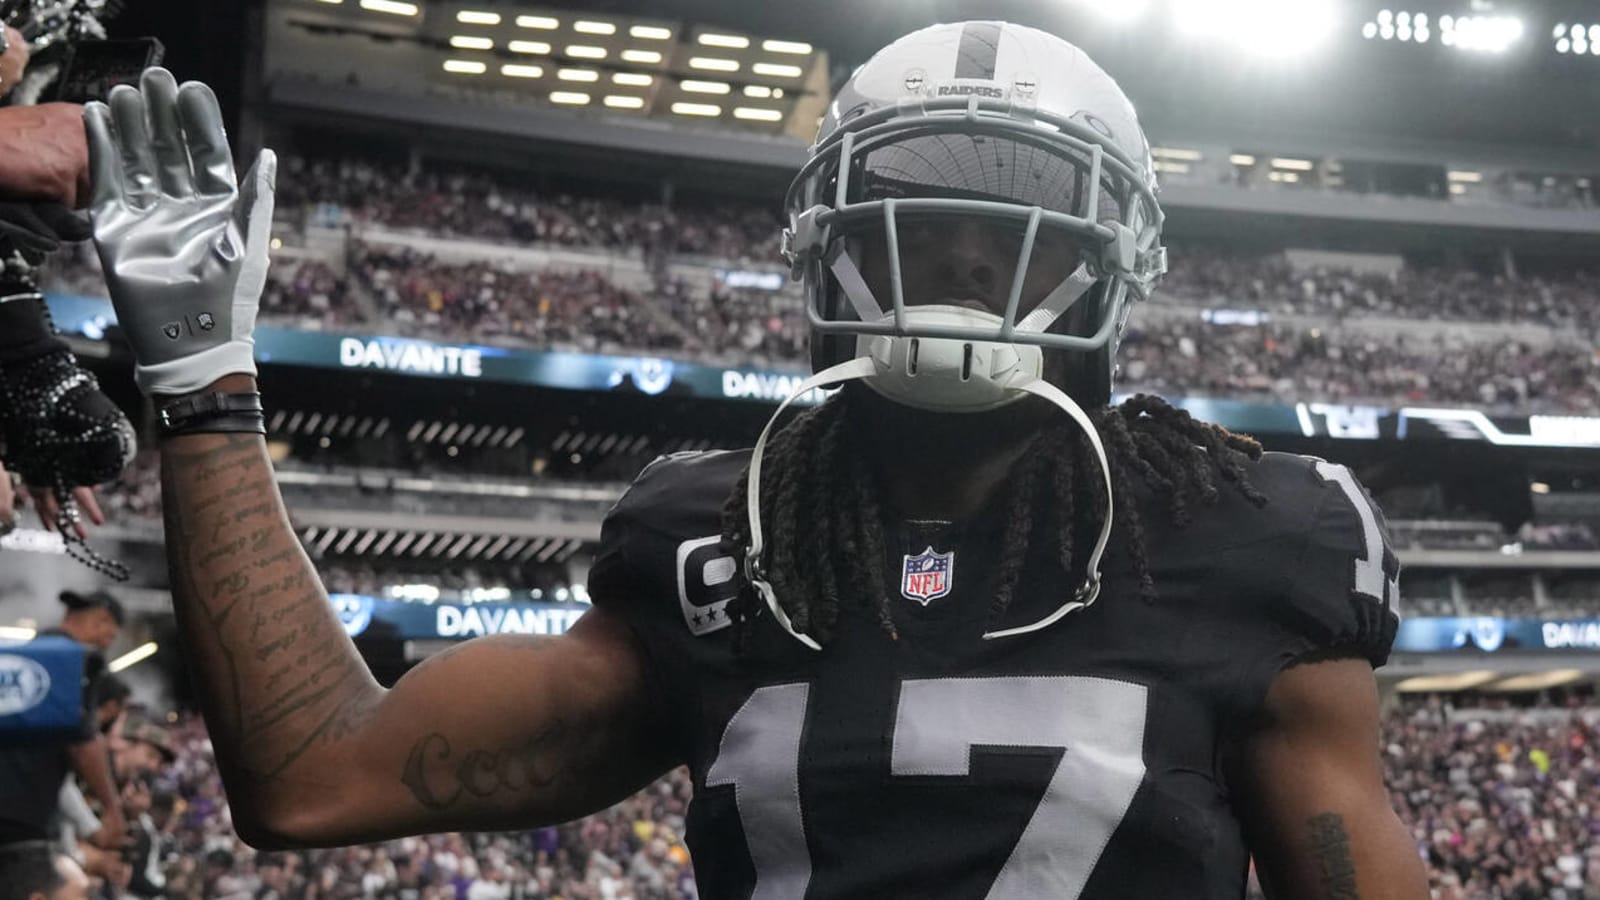 Watch: Raiders star records historic TD on trick play